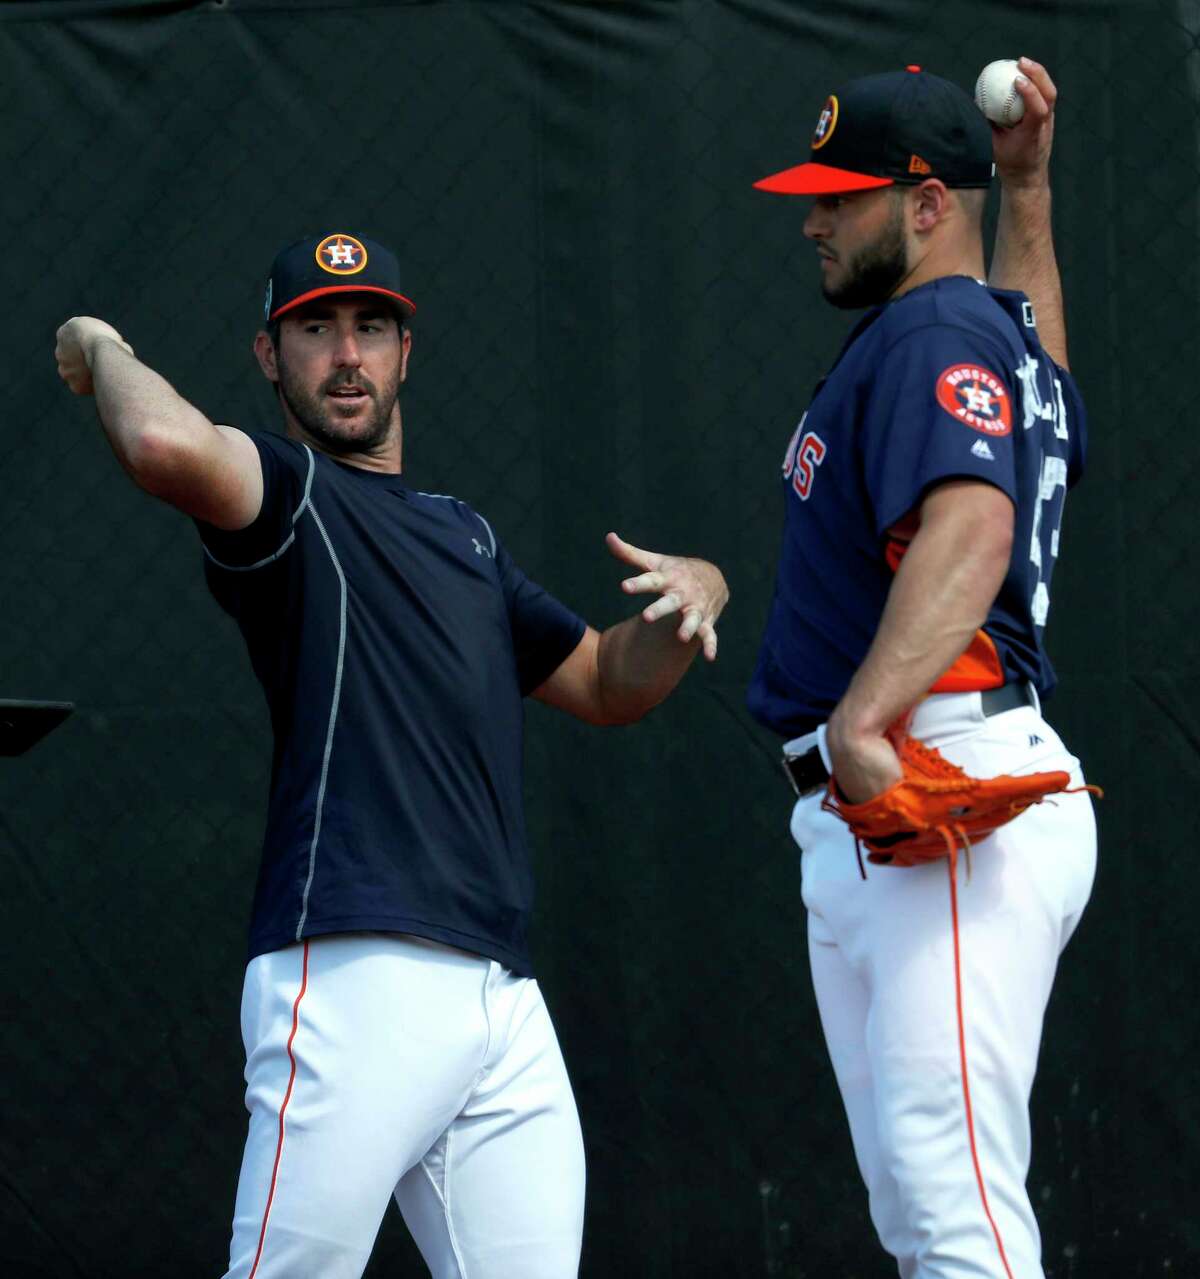 Houston Astros pitchers Justin Verlander (35) and Lance McCullers Jr. (43) work together as they consulted with Astros Director of Player Development, Pete Putila, in the bullpen during spring training at The Ballpark of the Palm Beaches, Saturday, Feb. 17, 2018, in West Palm Beach .